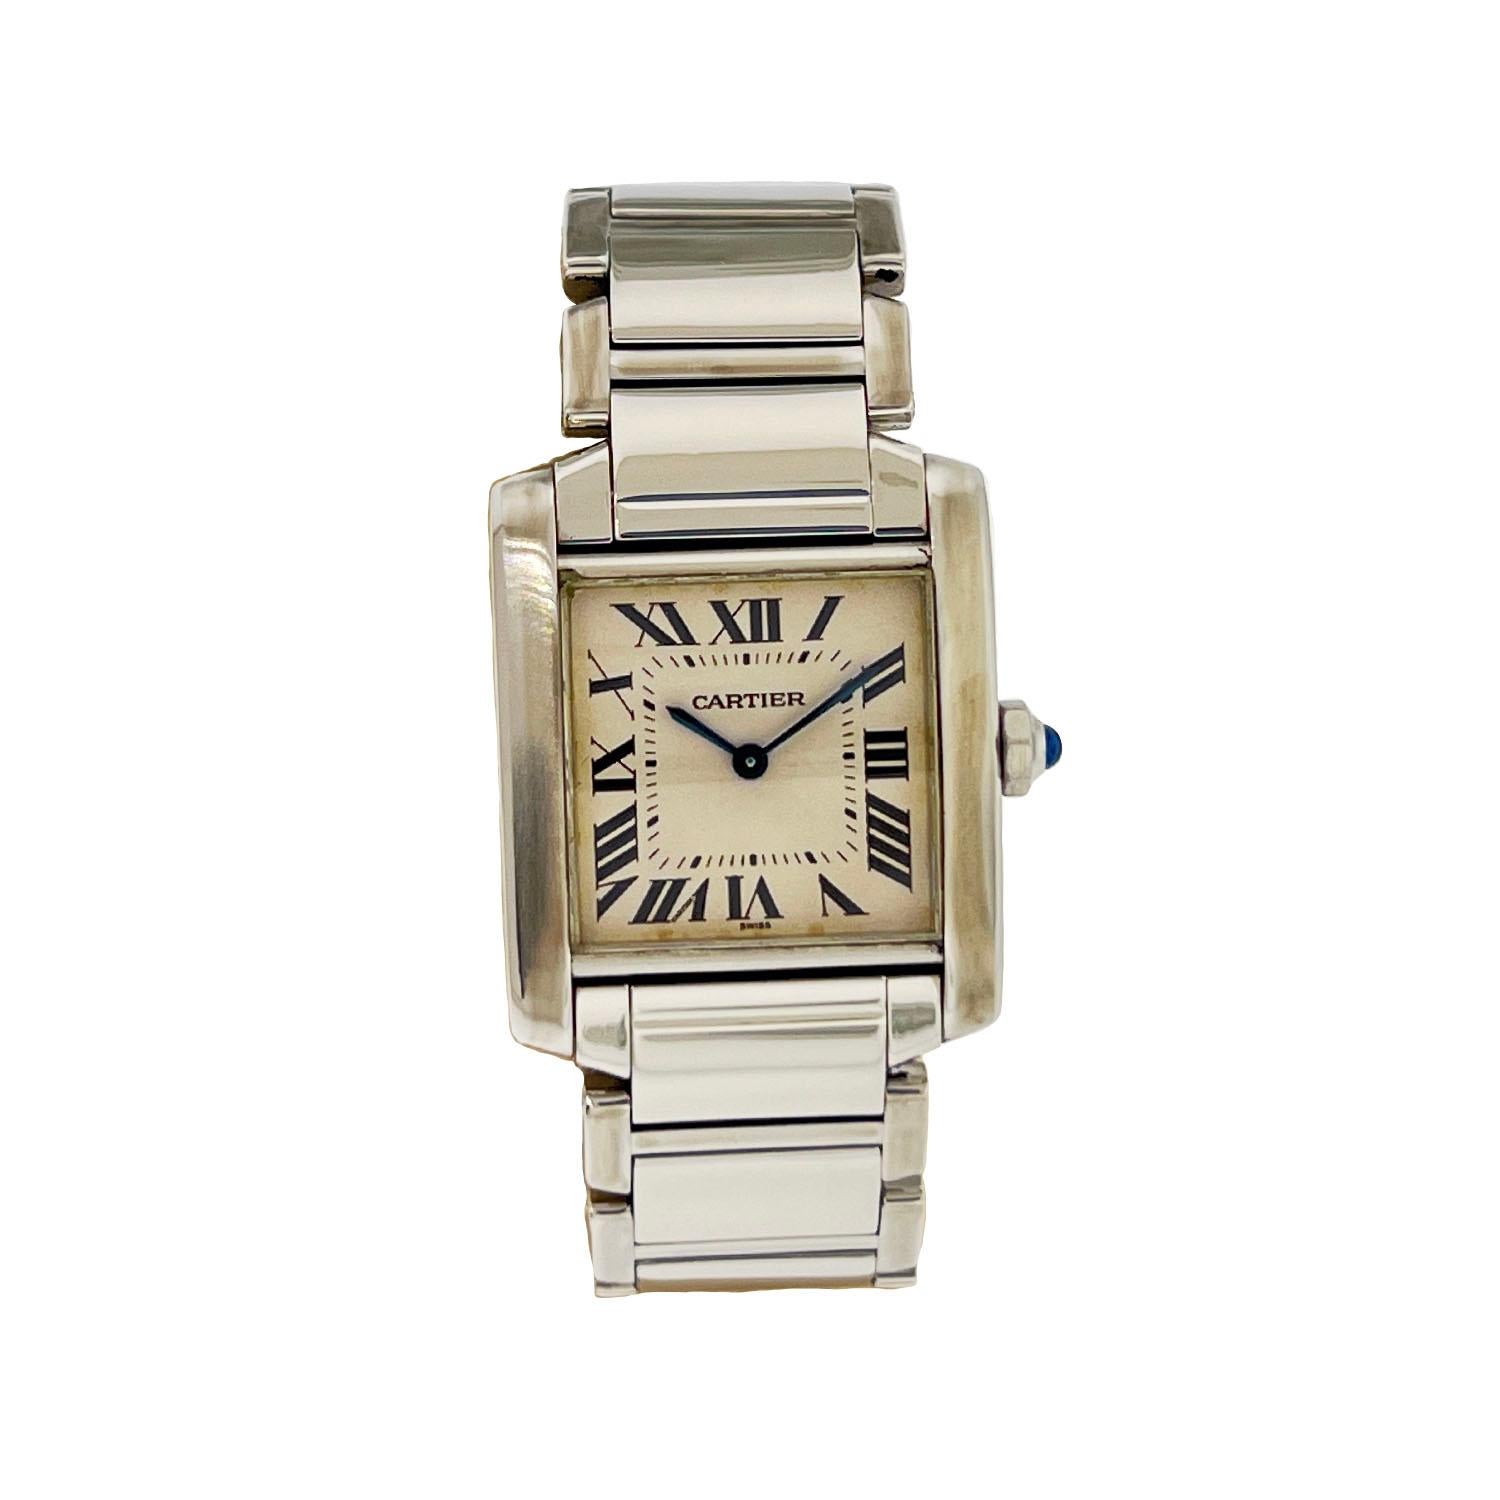 Cartier Tank Stainless Steel Mid Size Ladies Watch

Brand - Cartier

Model - 2301 Tank Mid Size

Dial - White Mother of Pearl dial with Roman numerals

Case - Stainless Steel

Bracelet - Stainless steel bracelet

Movement - Quartz

Bezel - Stainless